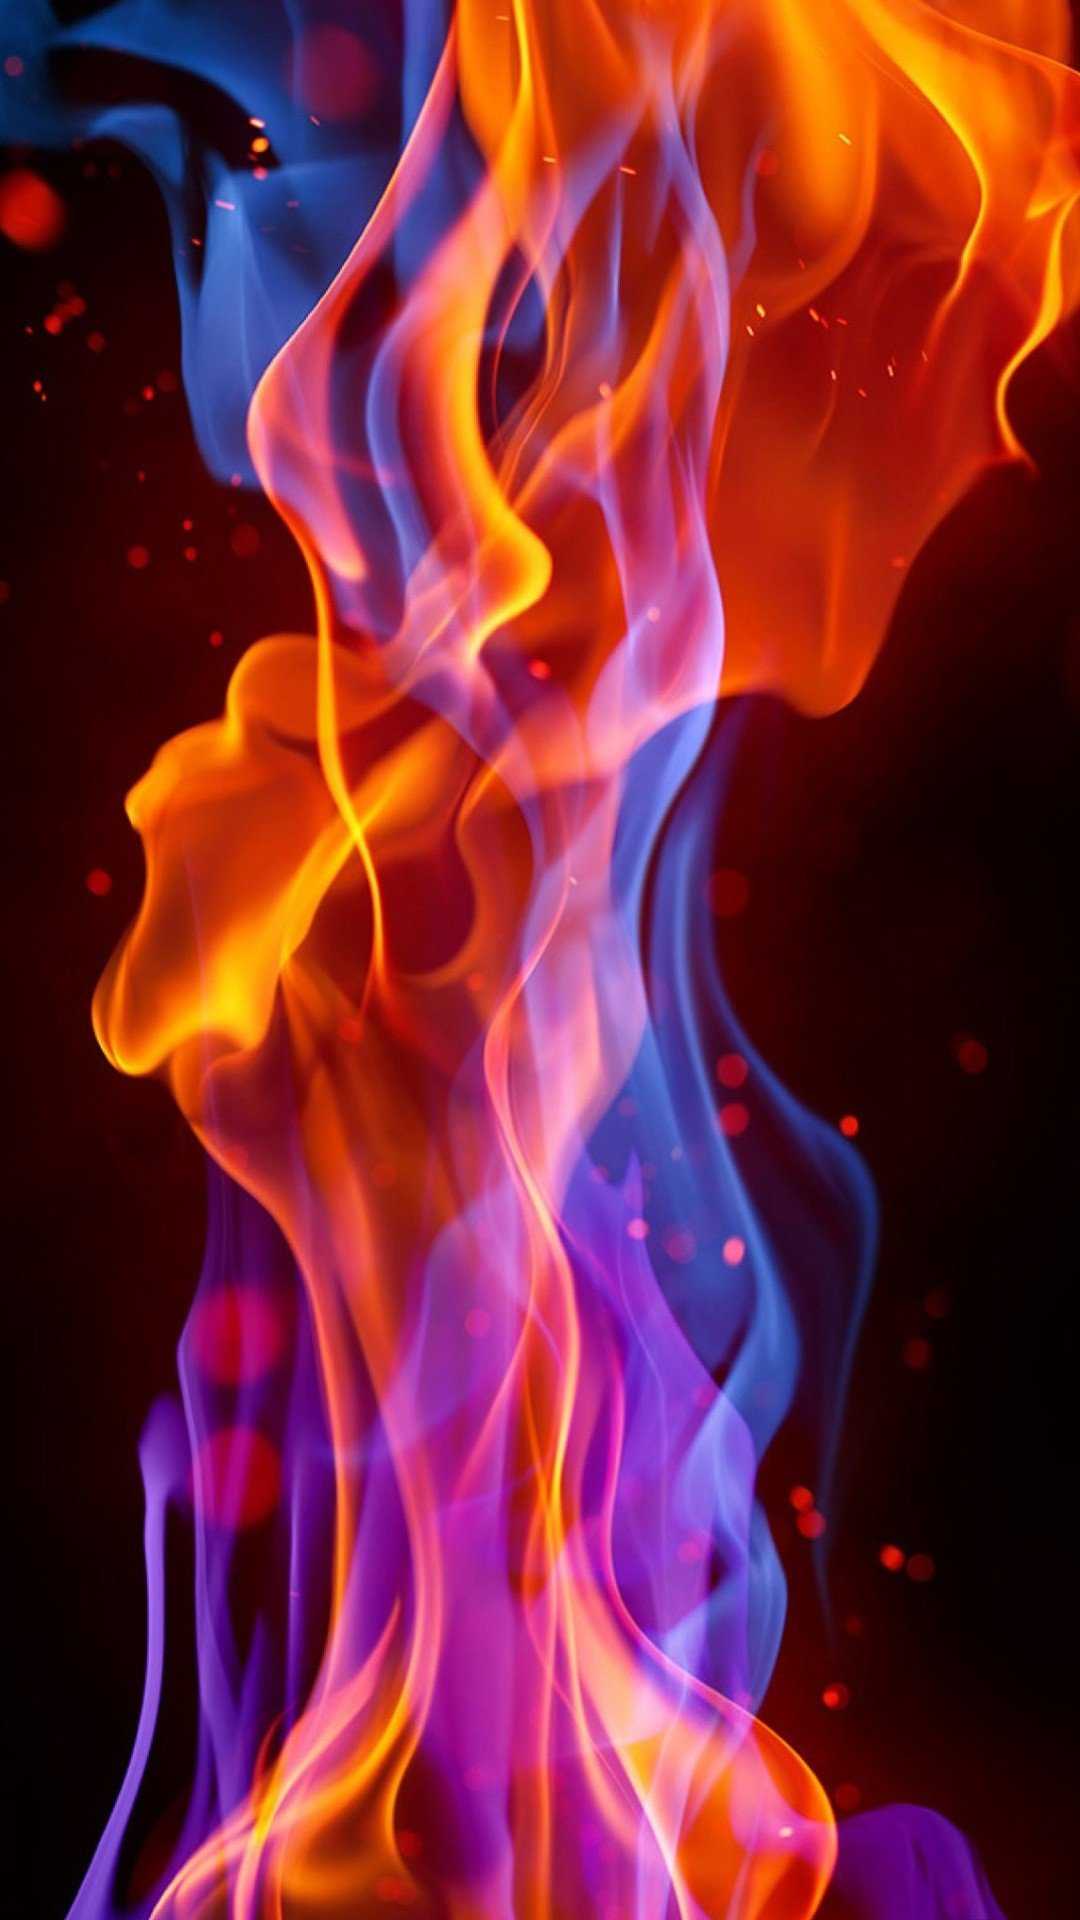 Fire background Wallpaper - NawPic